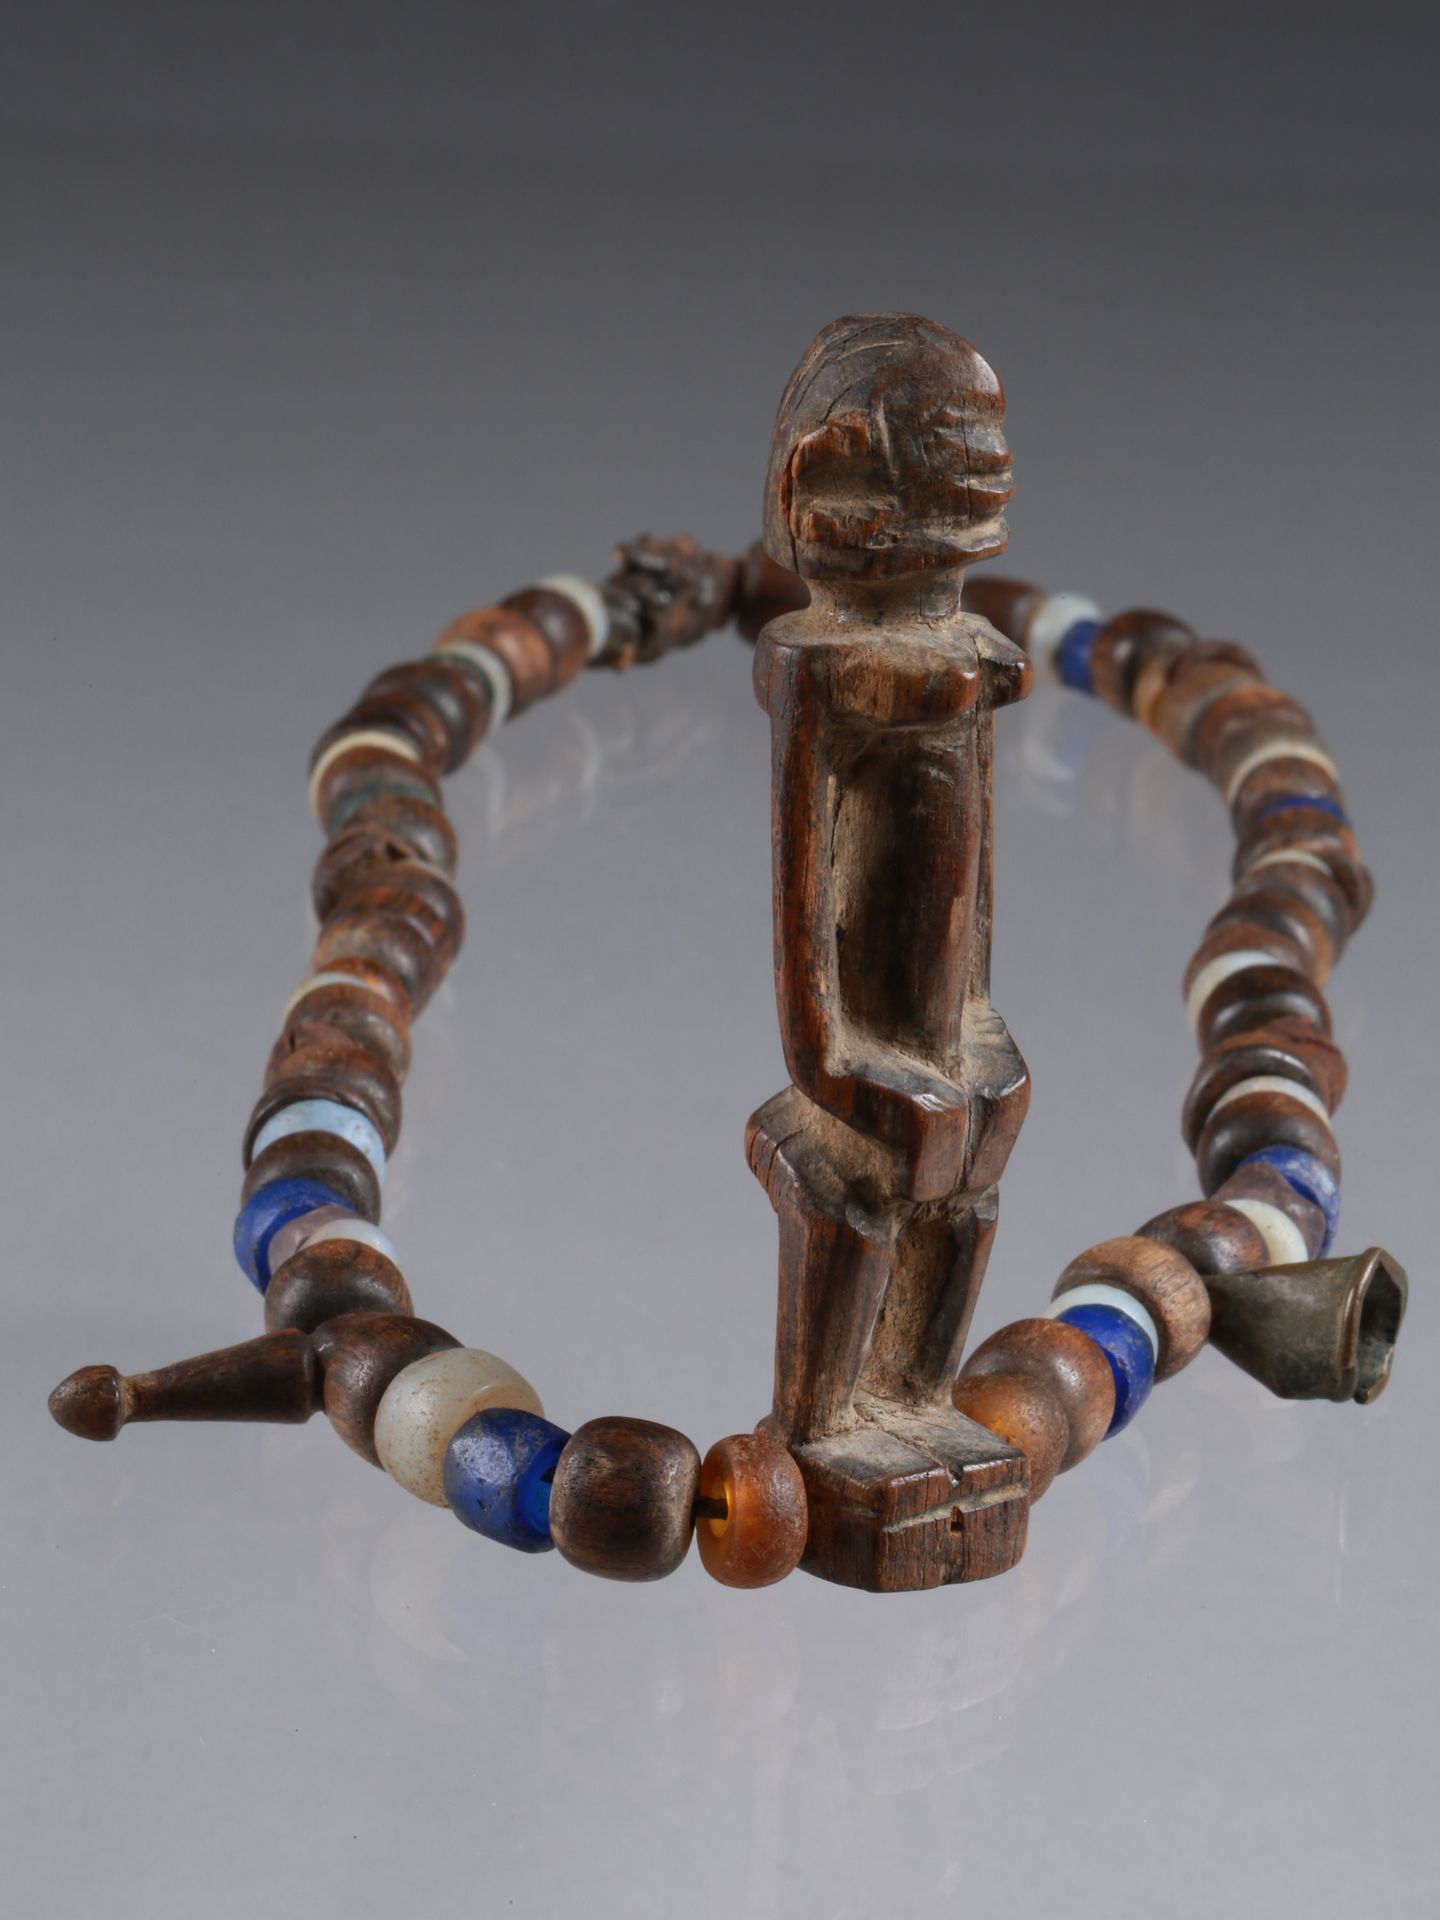 A Dogon Necklace with a figurative Pendant Necklace with figural pendant

Dogon,&hellip;